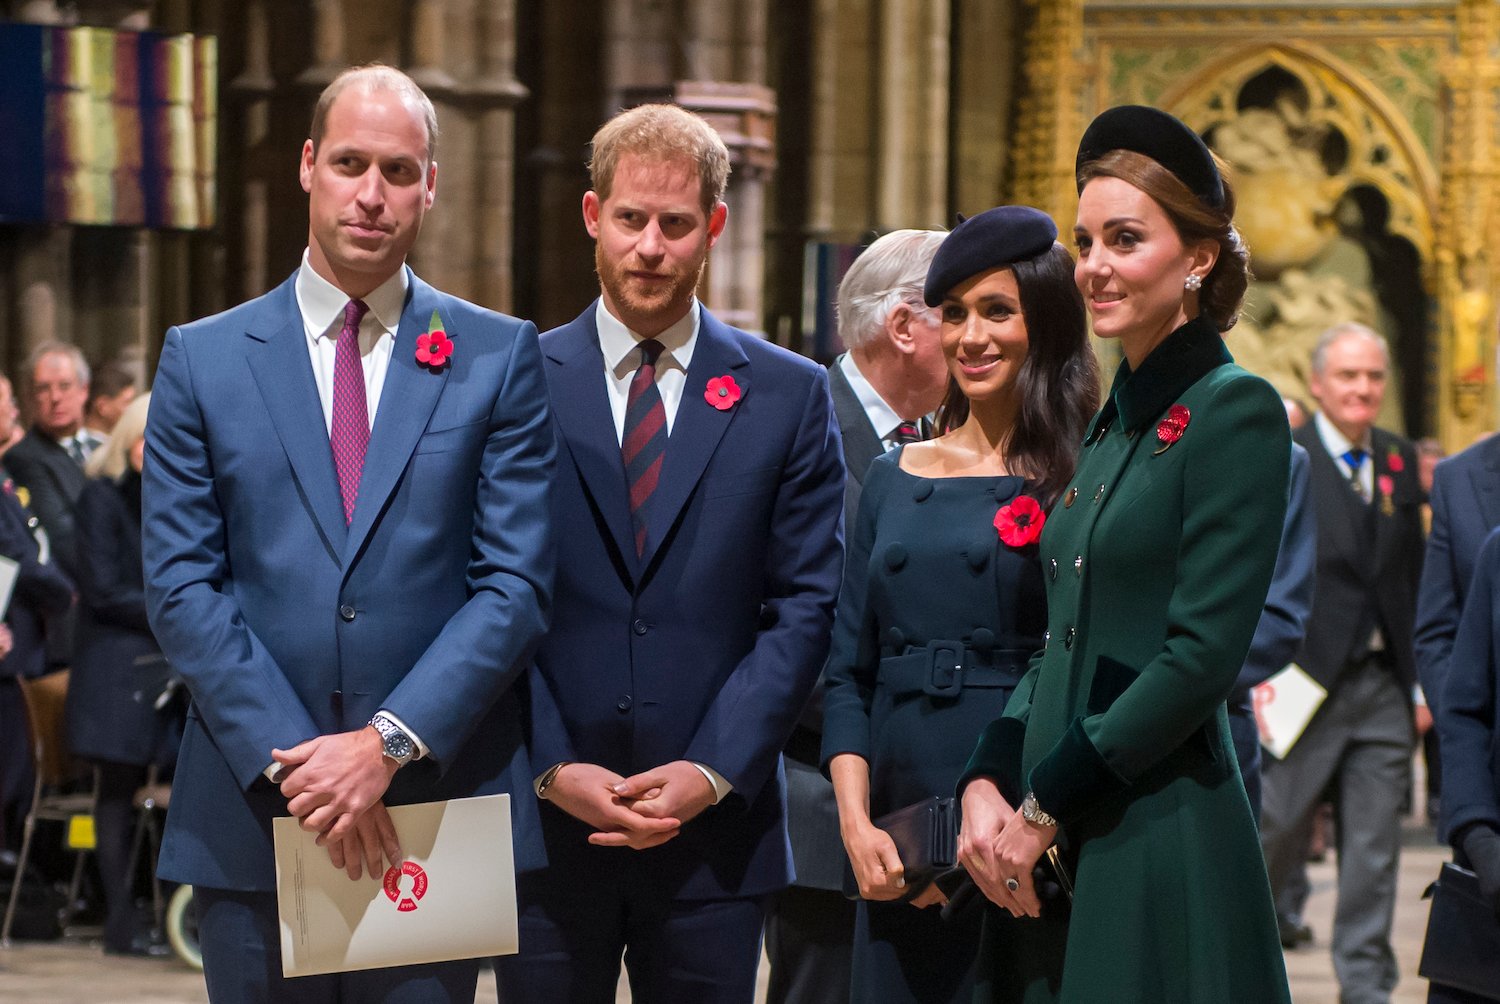 Prince William, Prince Harry, Meghan Markle, and Kate Middleton attend a service marking the centenary of WW1 armistice at Westminster Abbey